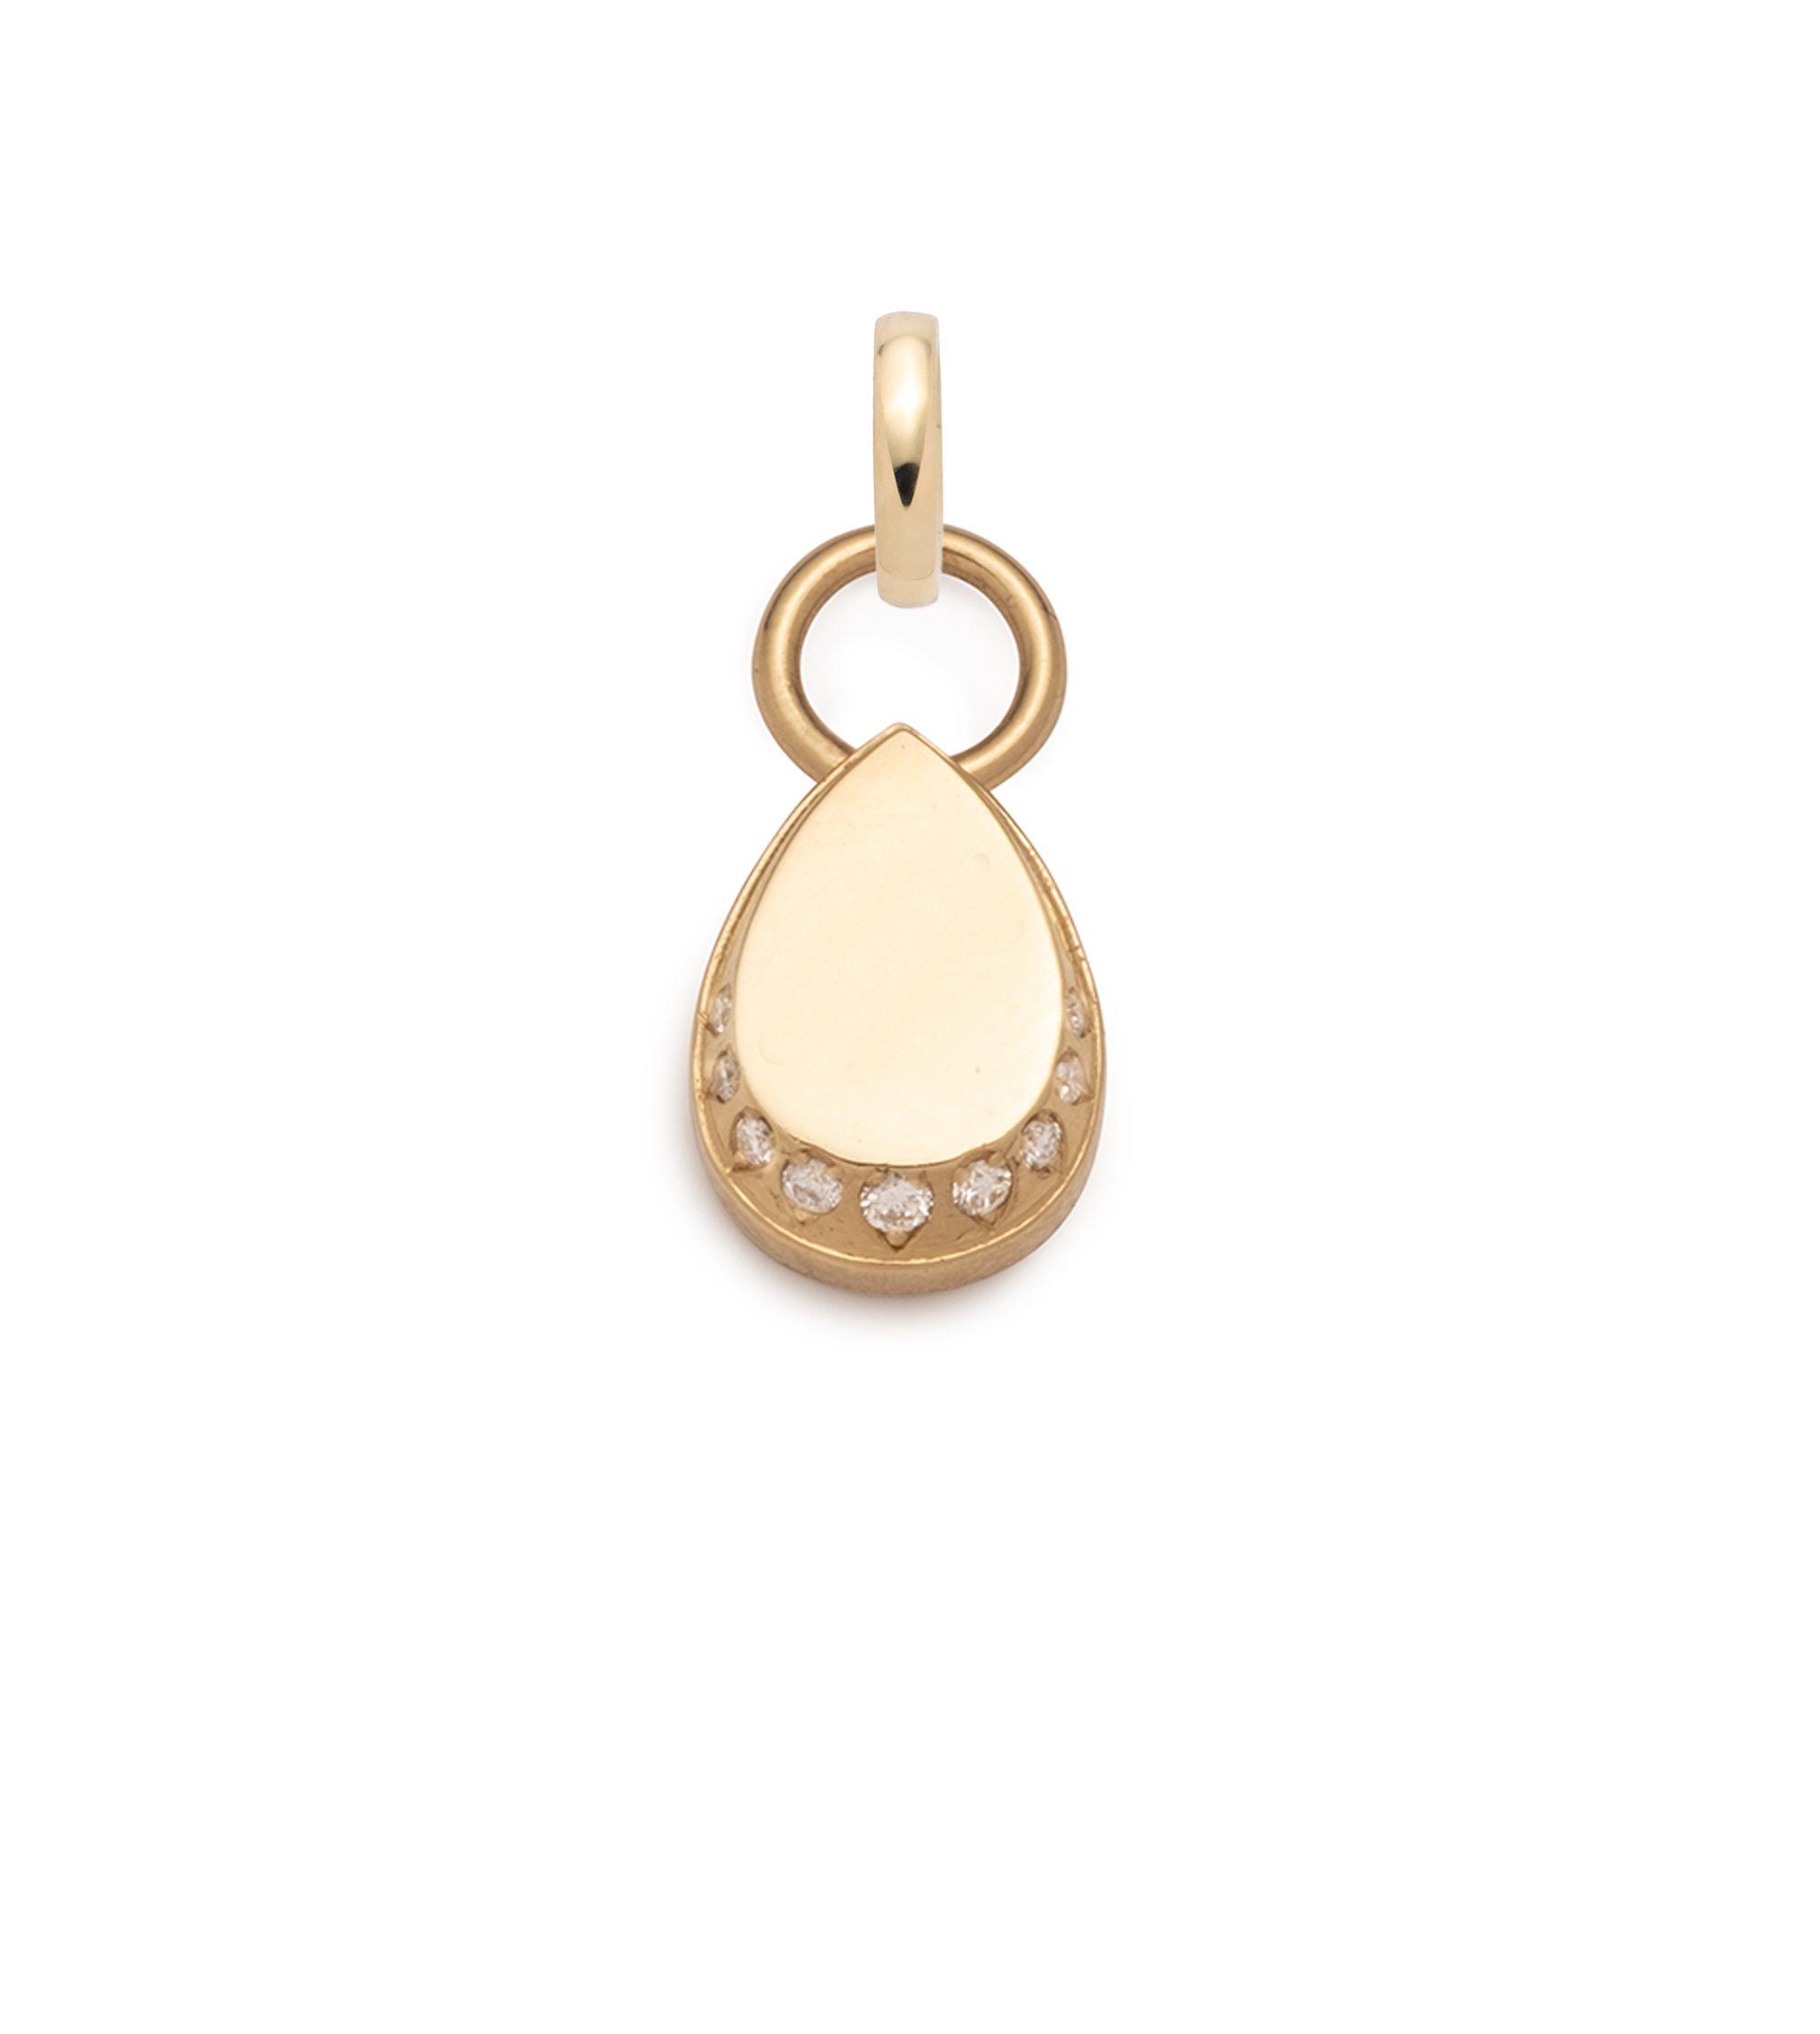 Engravable Pear : Small Medallion with Oval Push Gate